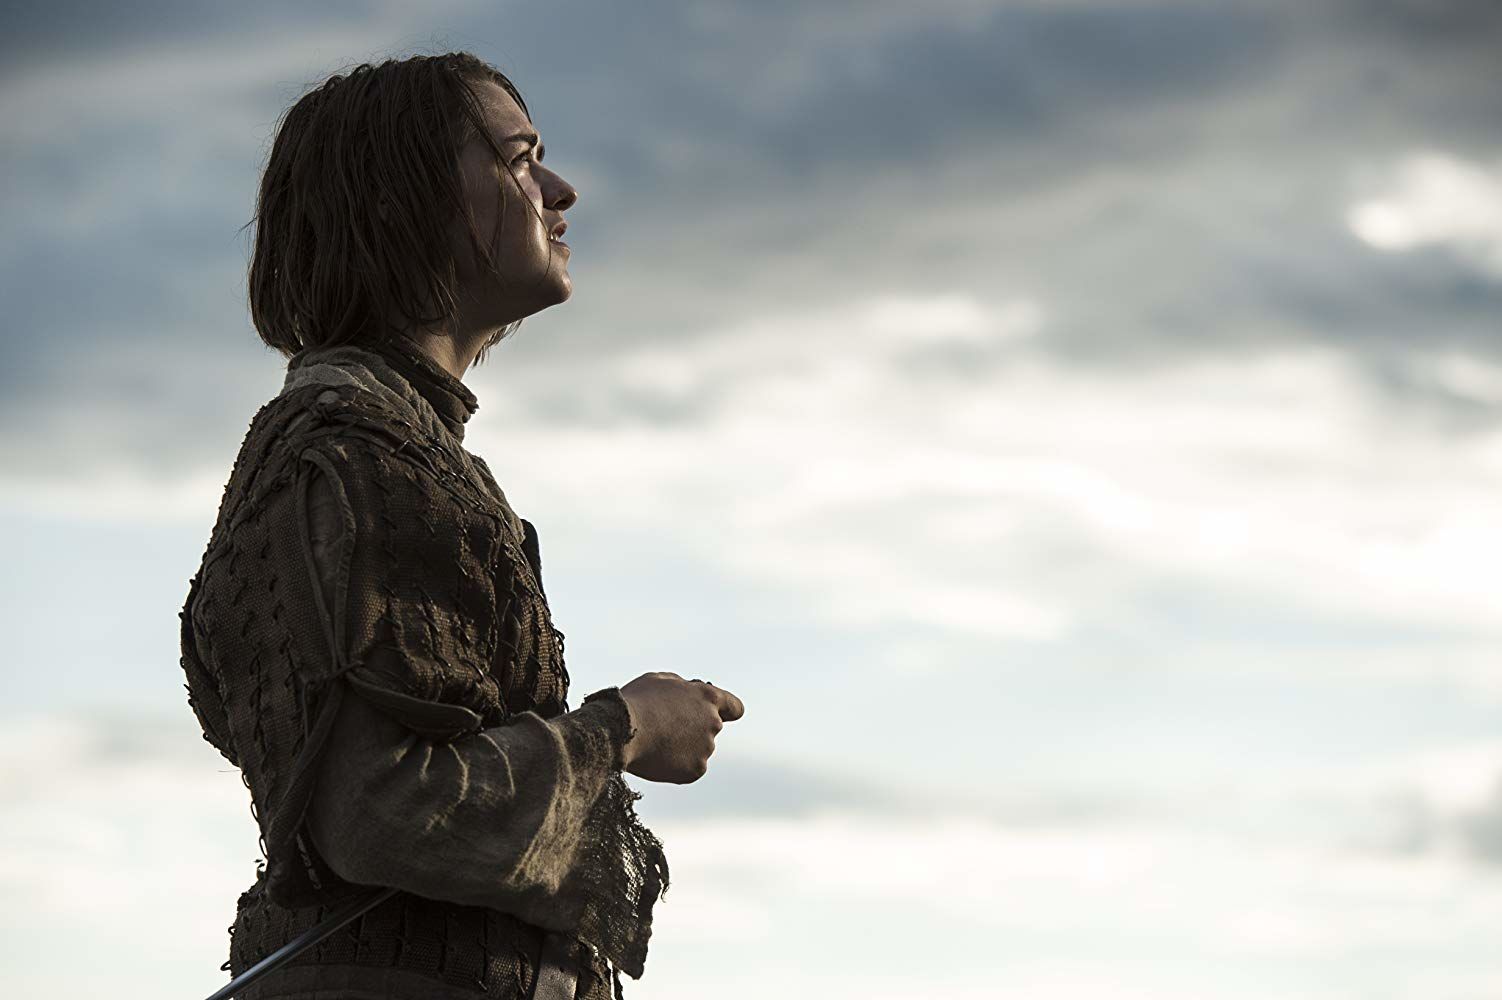 A girl's departure was a major turning point for Arya Stark and Game of Thrones